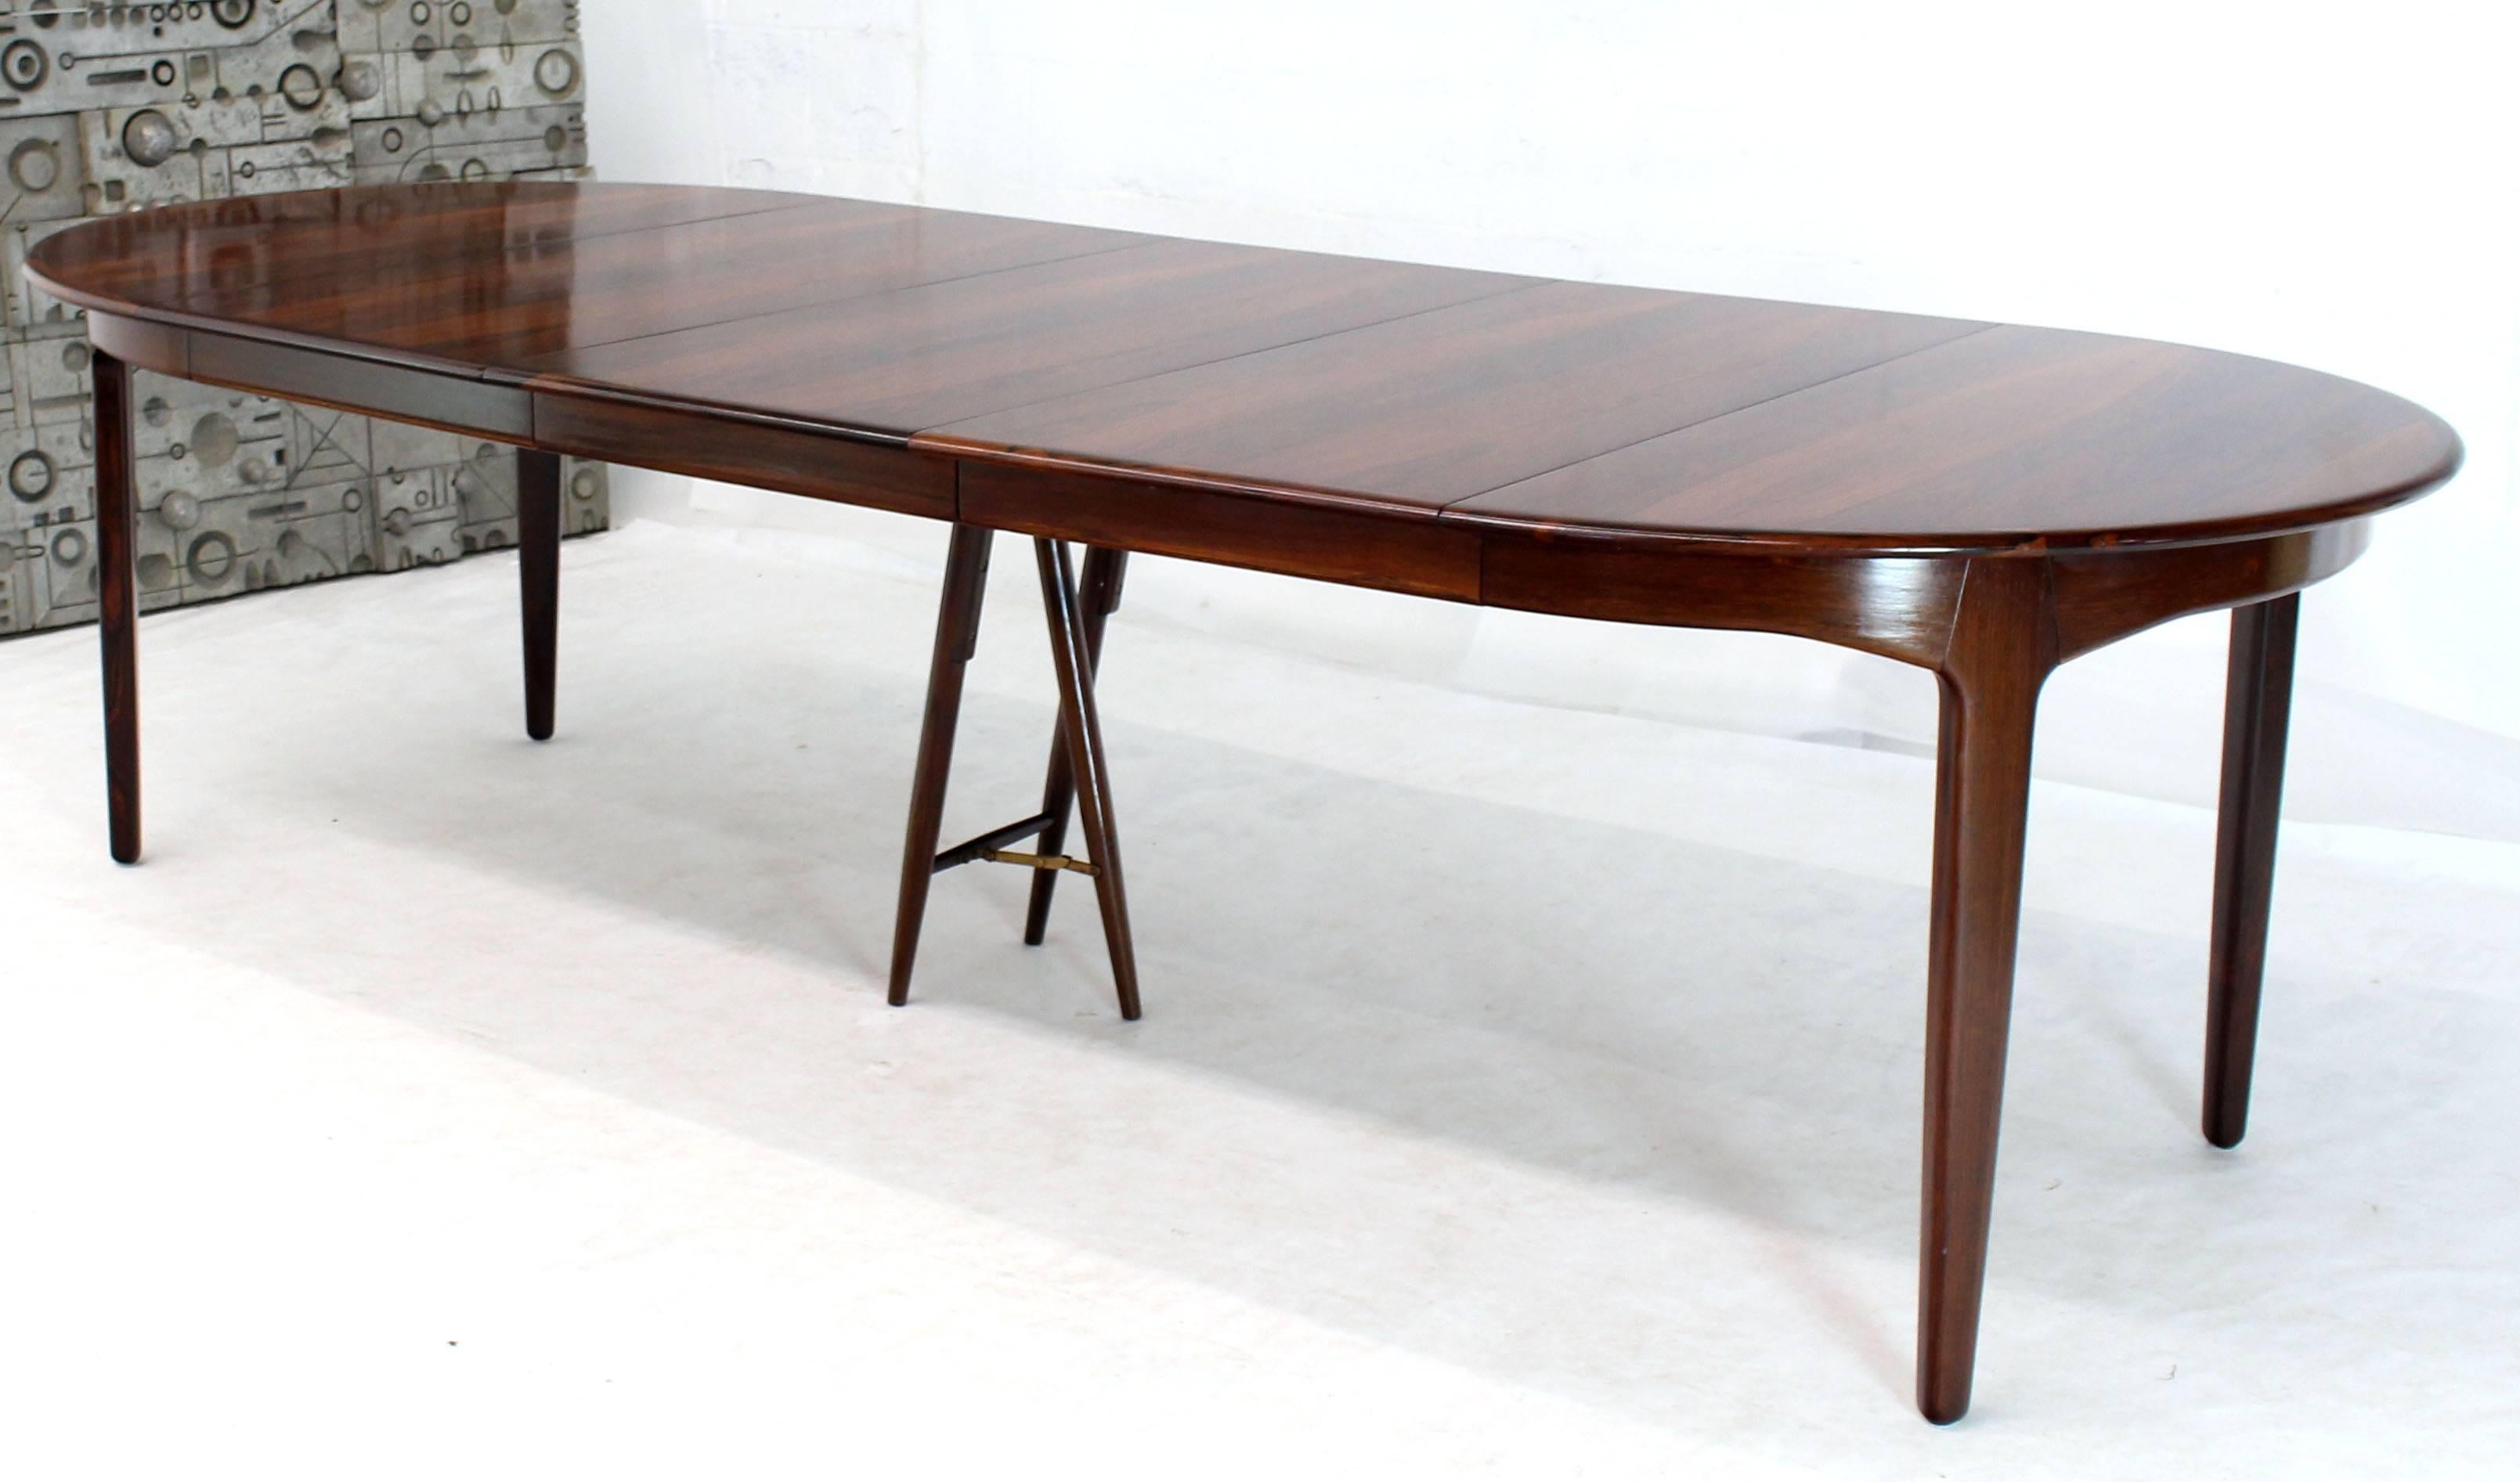 Vivid rosewood pattern large Danish modern rosewood dining banquet table with three 20